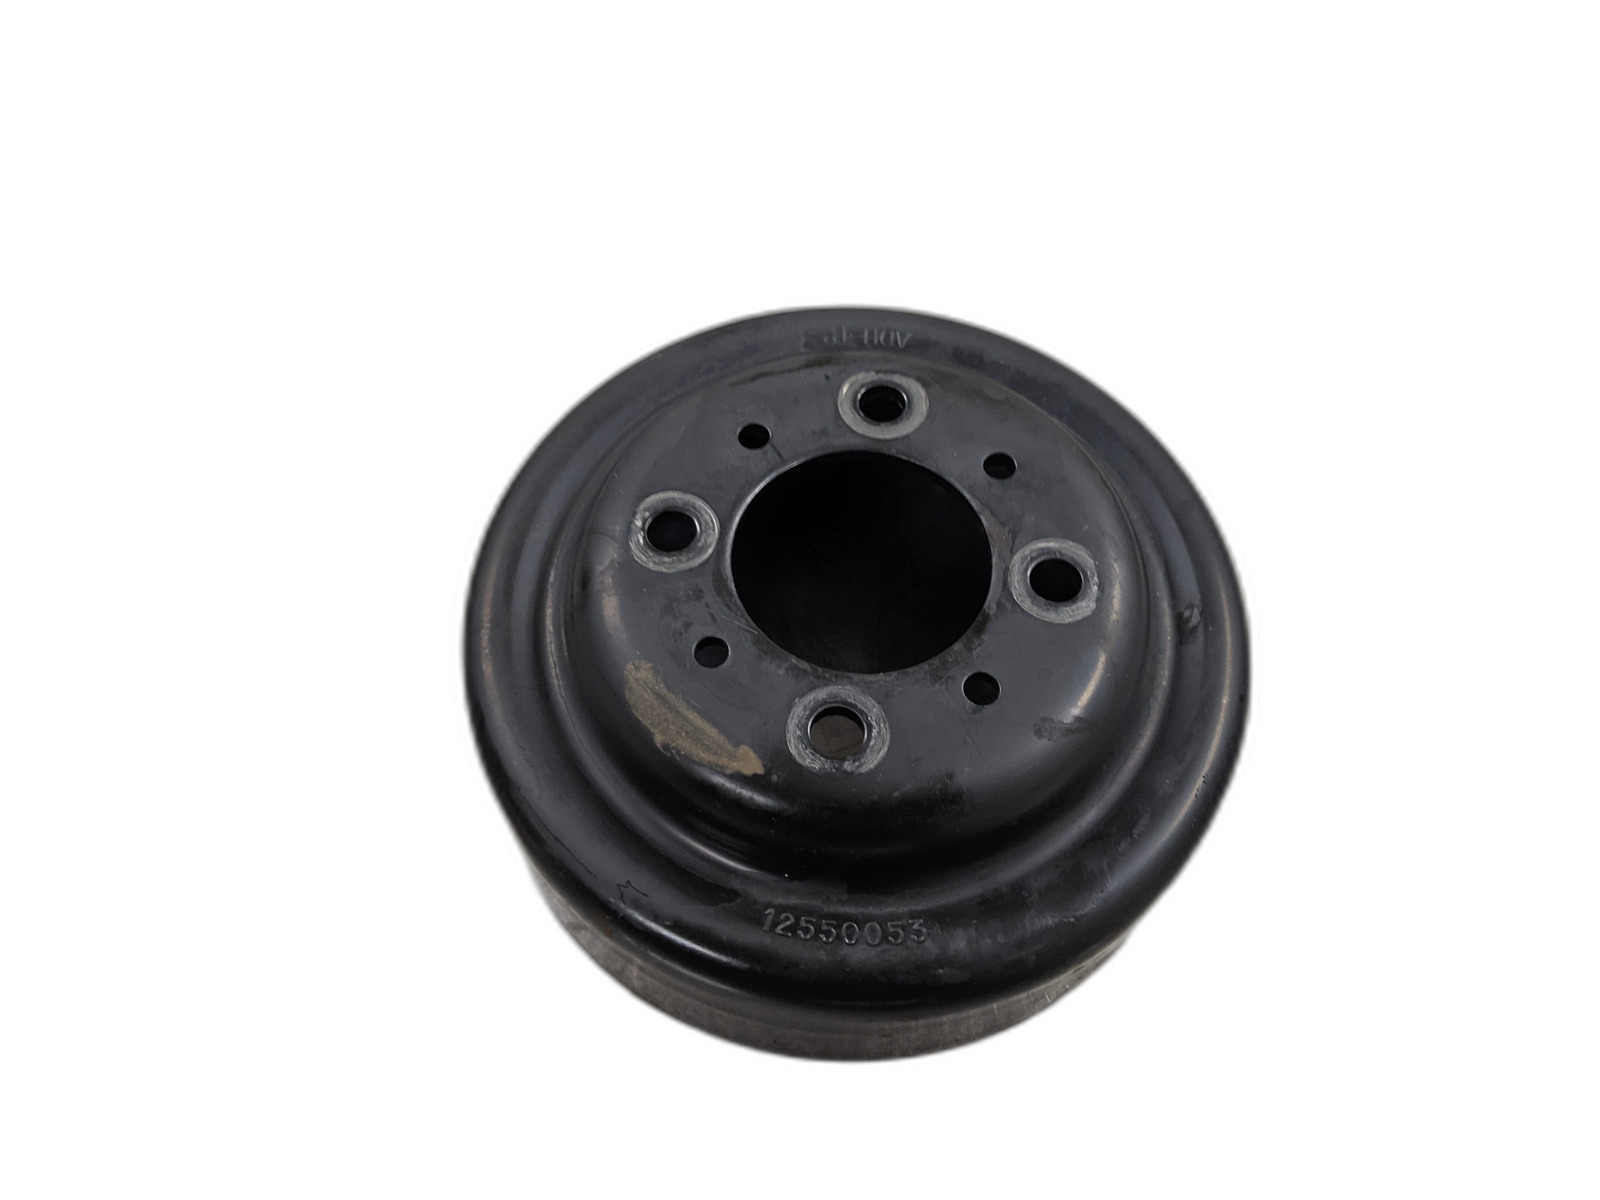 Primary image for Water Coolant Pump Pulley From 2002 Chevrolet Blazer  4.3 12550053